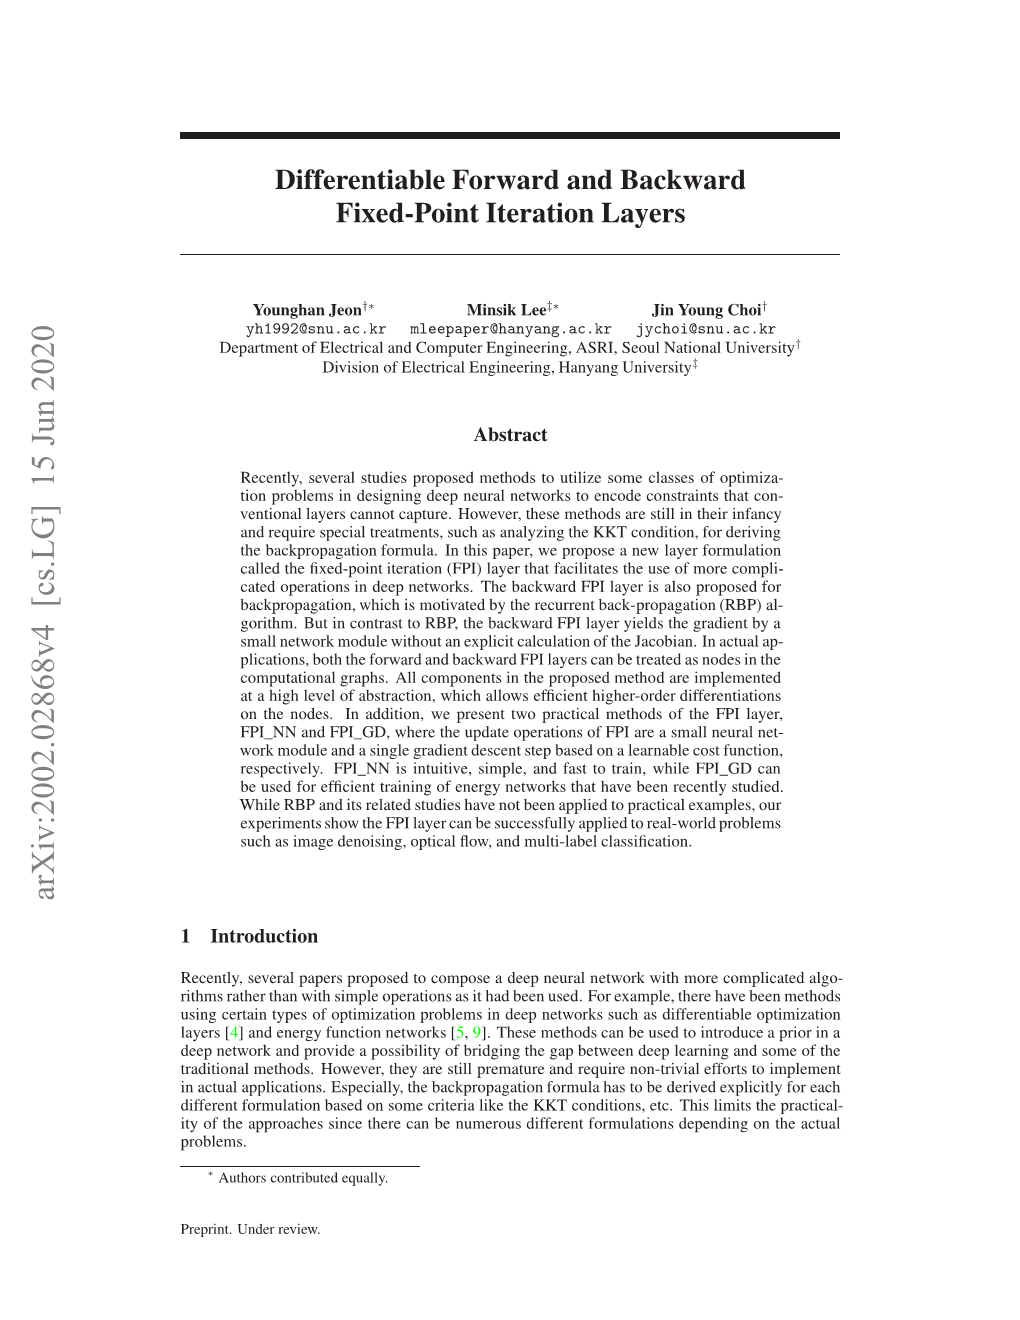 Differentiable Forward and Backward Fixed-Point Iteration Layers